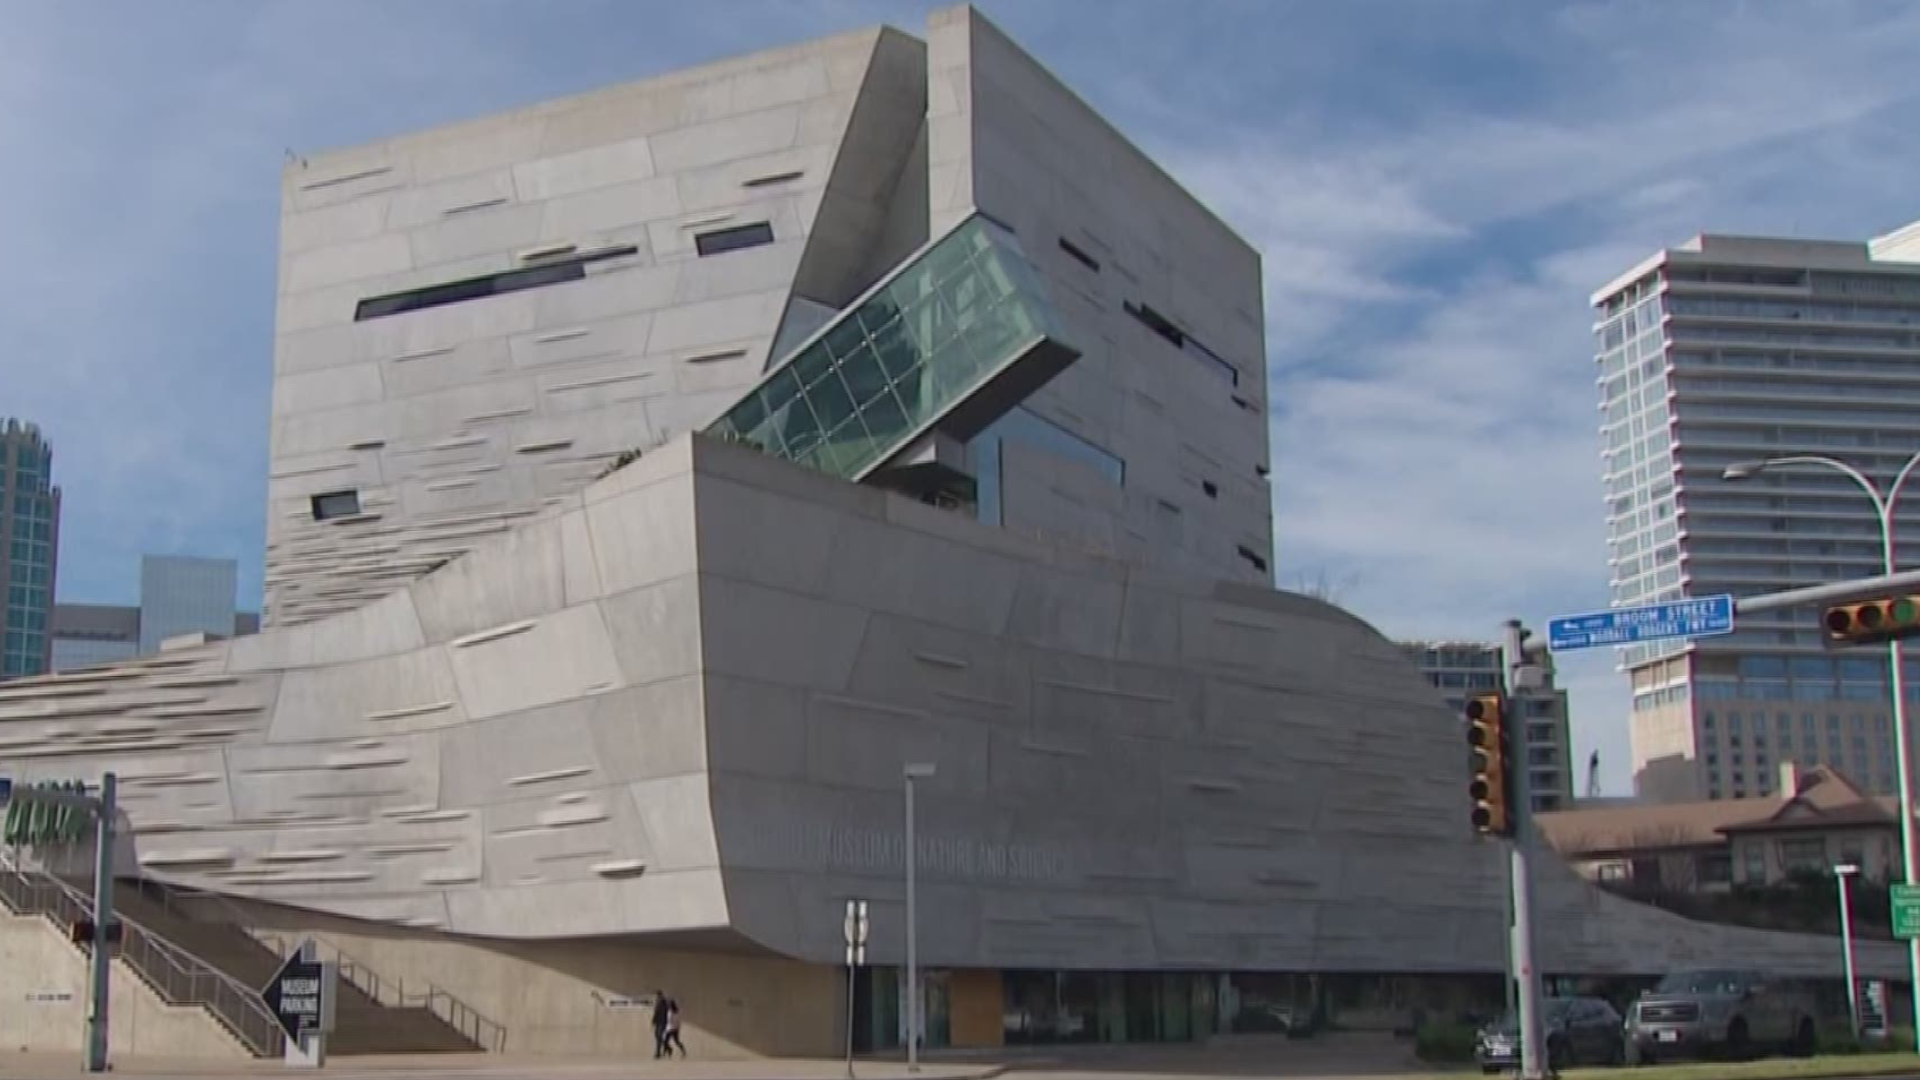 Perot Museum to reexamine safety procedures after employee suicide